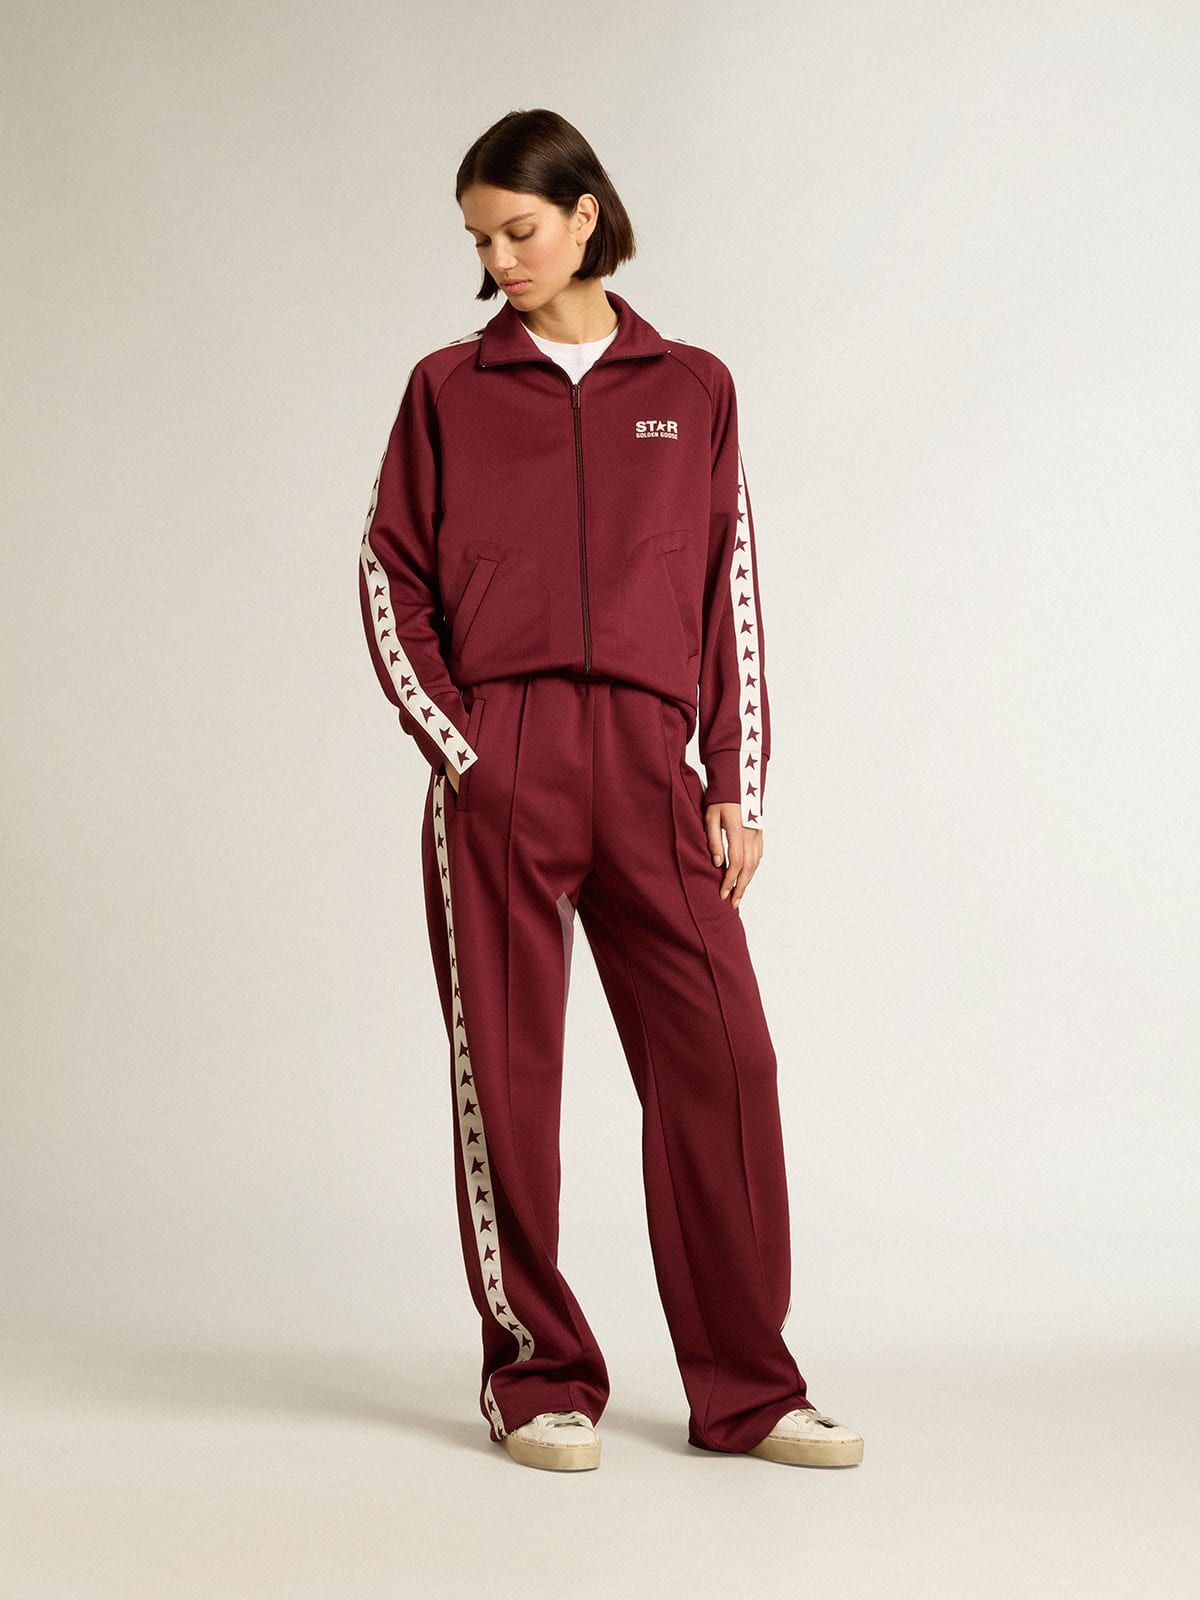 Golden Goose - Women’s burgundy zipped sweatshirt with white strip and contrasting stars in 